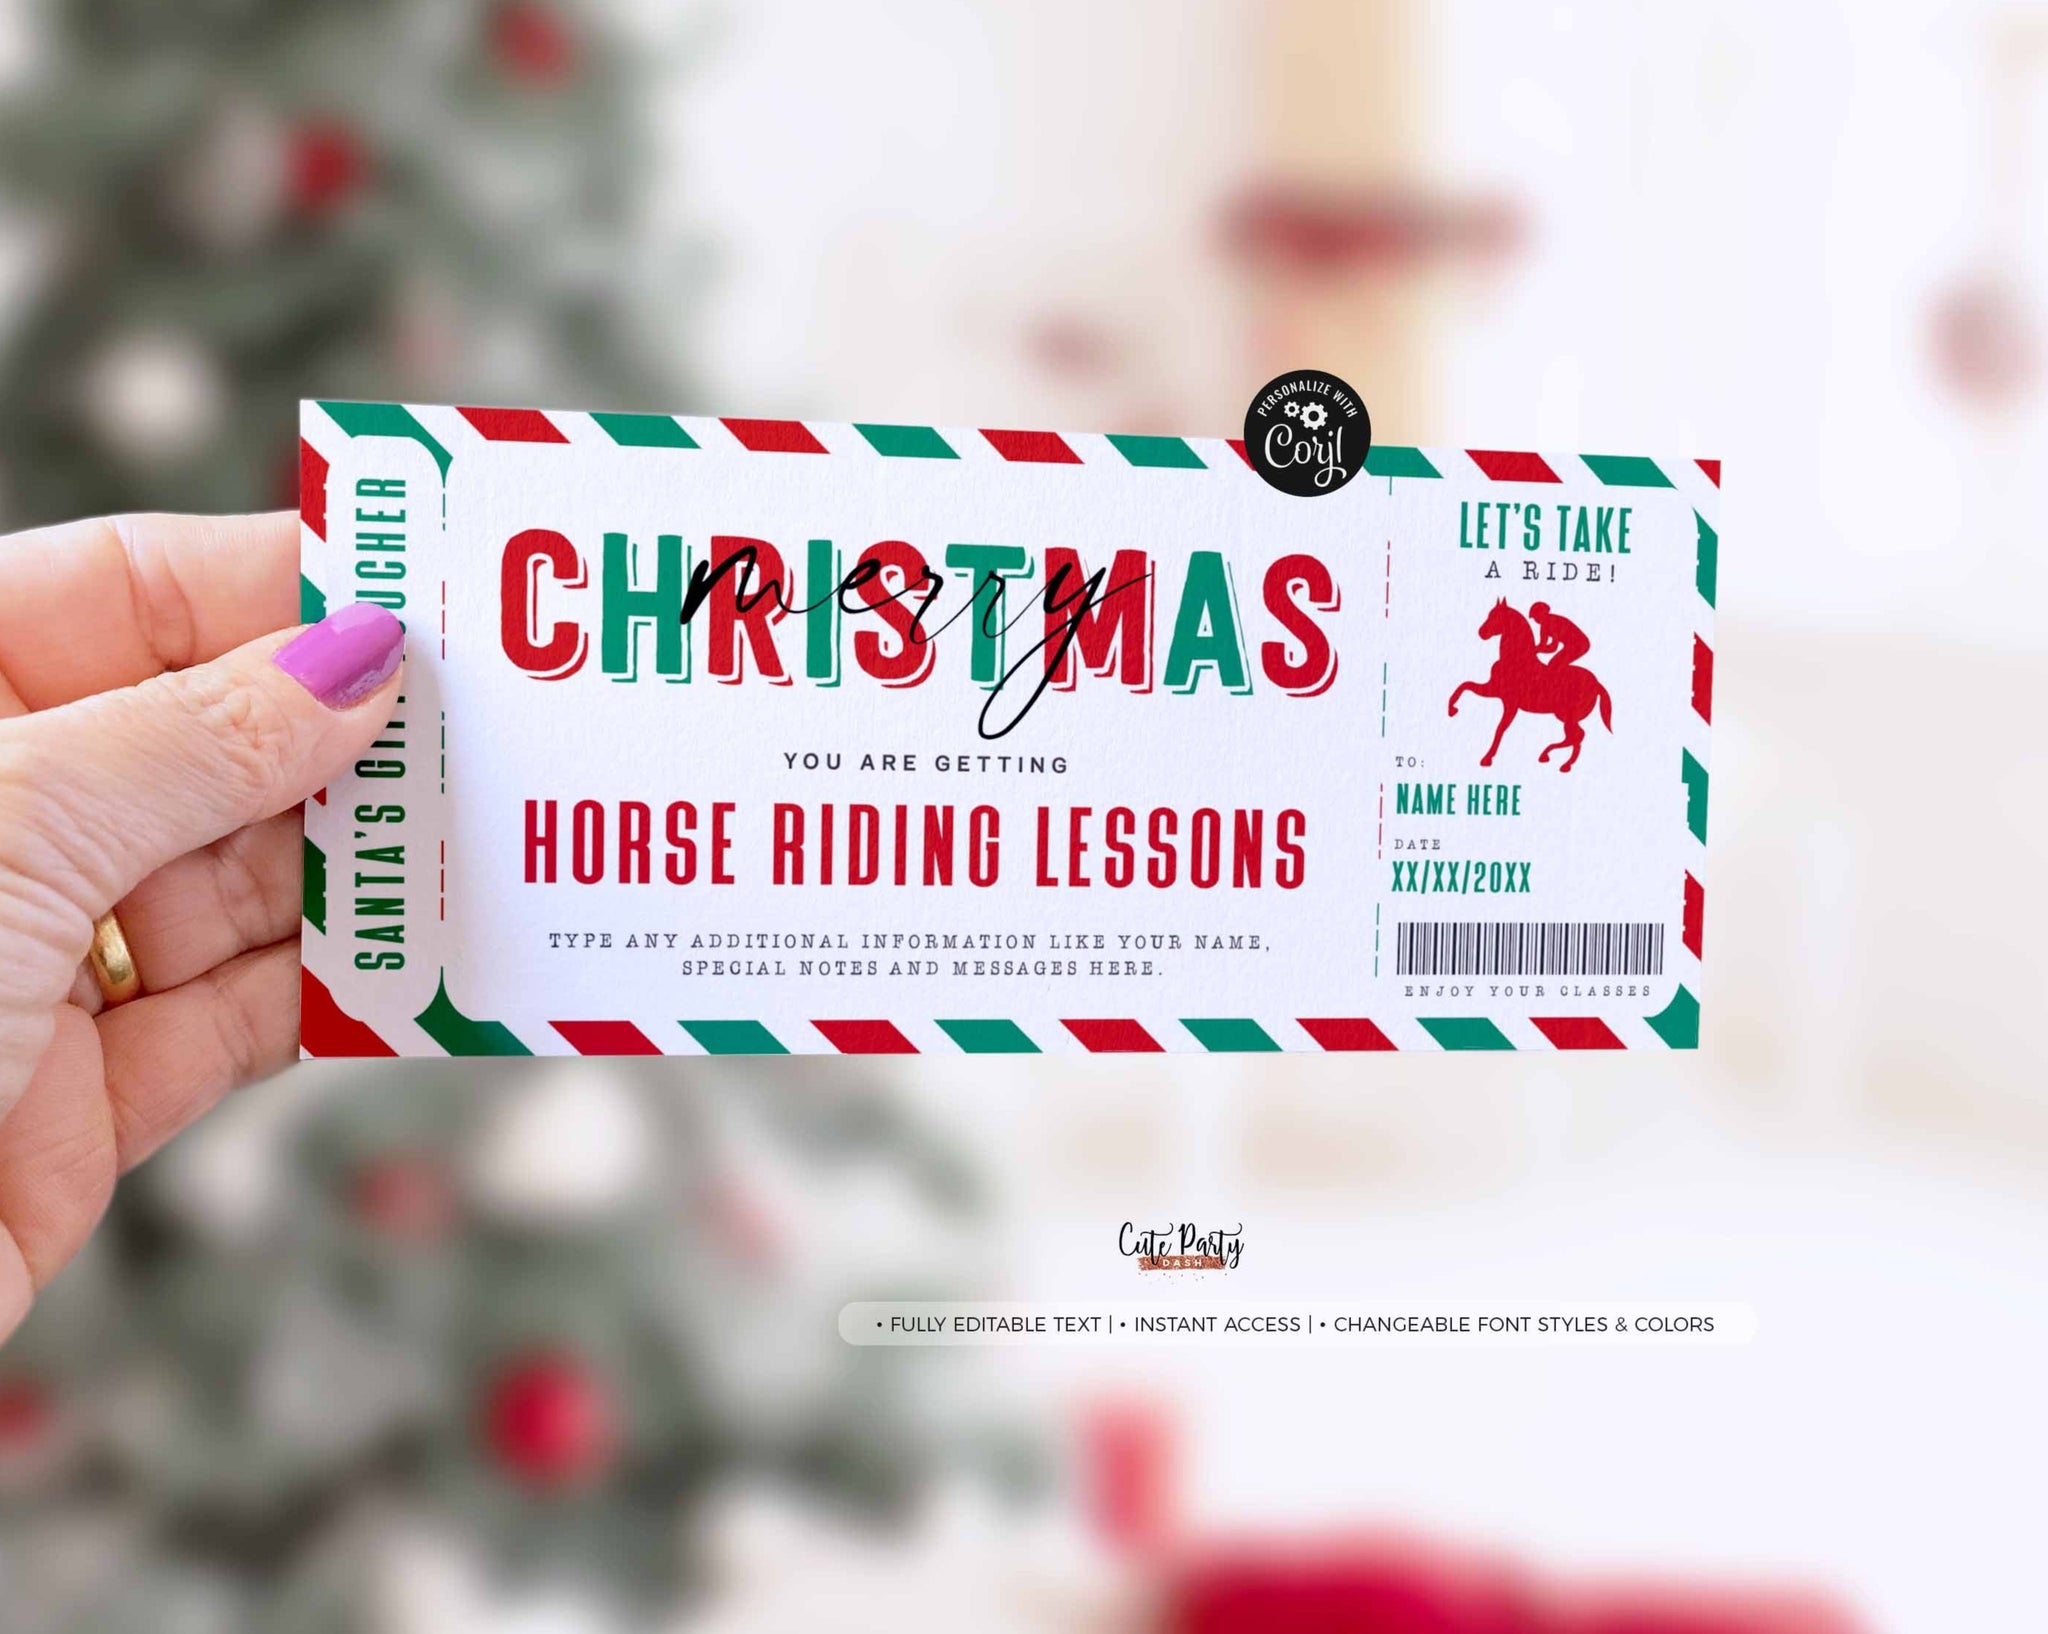 Horse Riding Lessons Gift Voucher template, Editable Christmas Gift Experience Horseback riding lessons Voucher certificate INSTANT DOWNLOAD